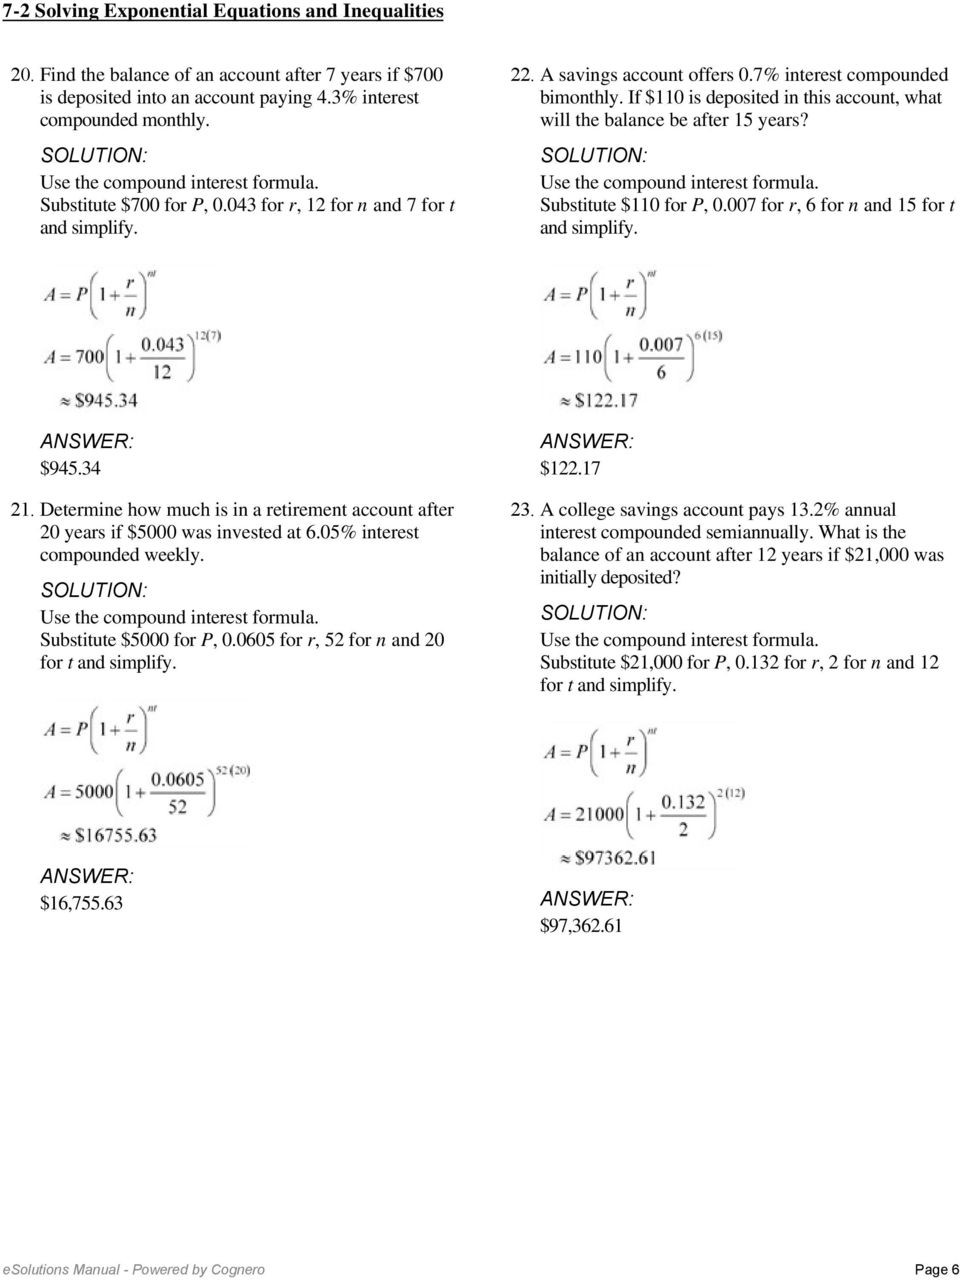 Exponential Function Word Problems Worksheet 7 2 solving Exponential Equations and Inequalities solve